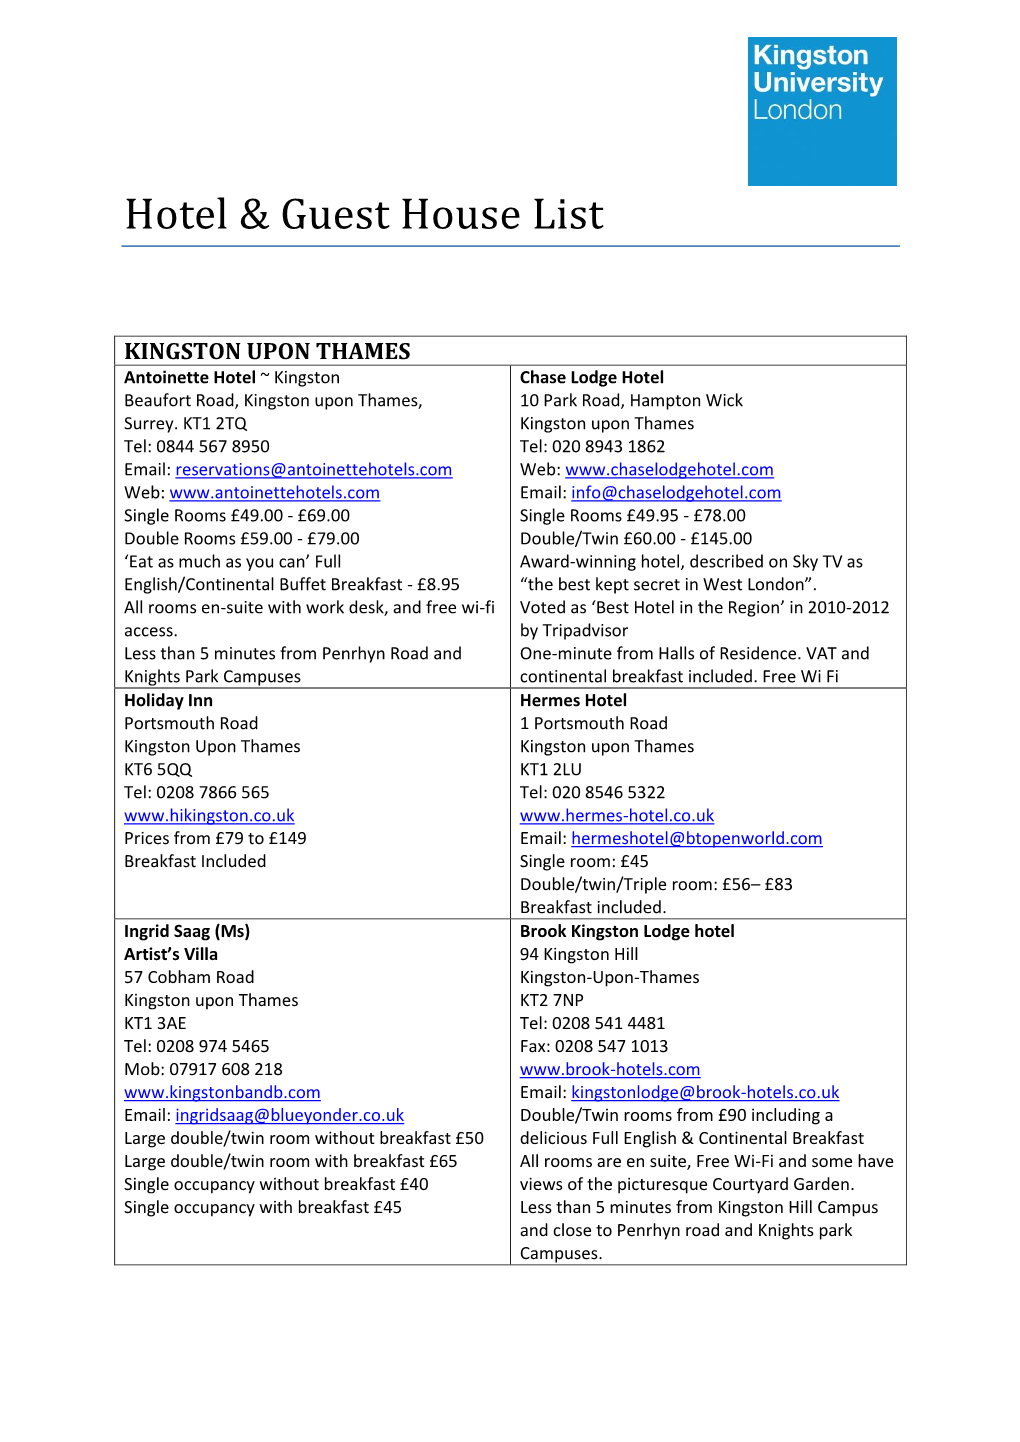 Hotel & Guest House List